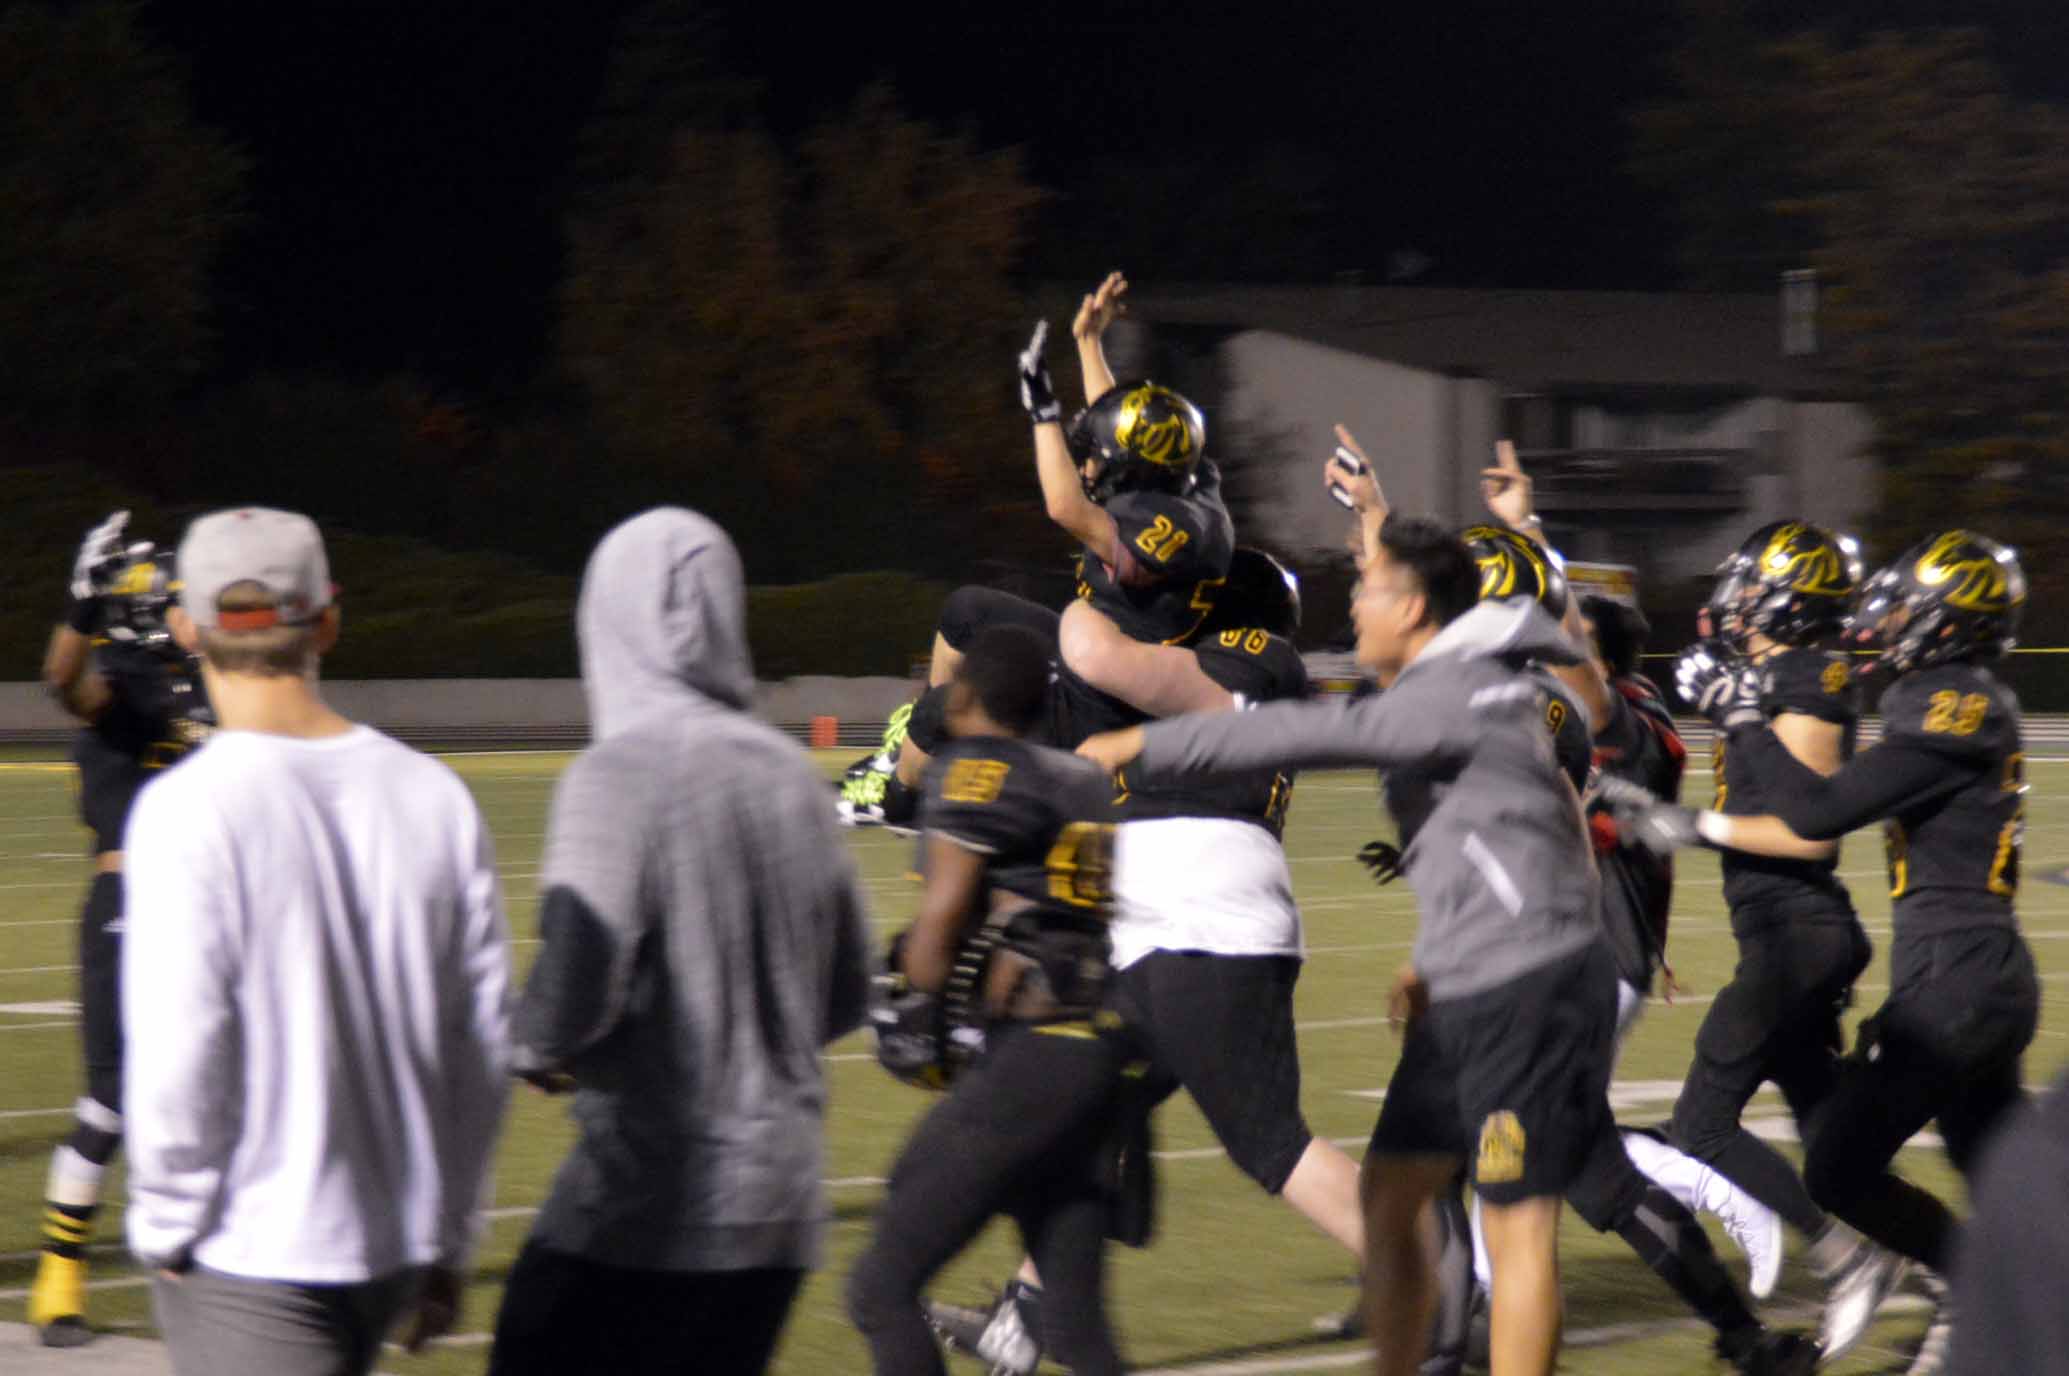 Video: Cottonwood student with special needs scores touchdown